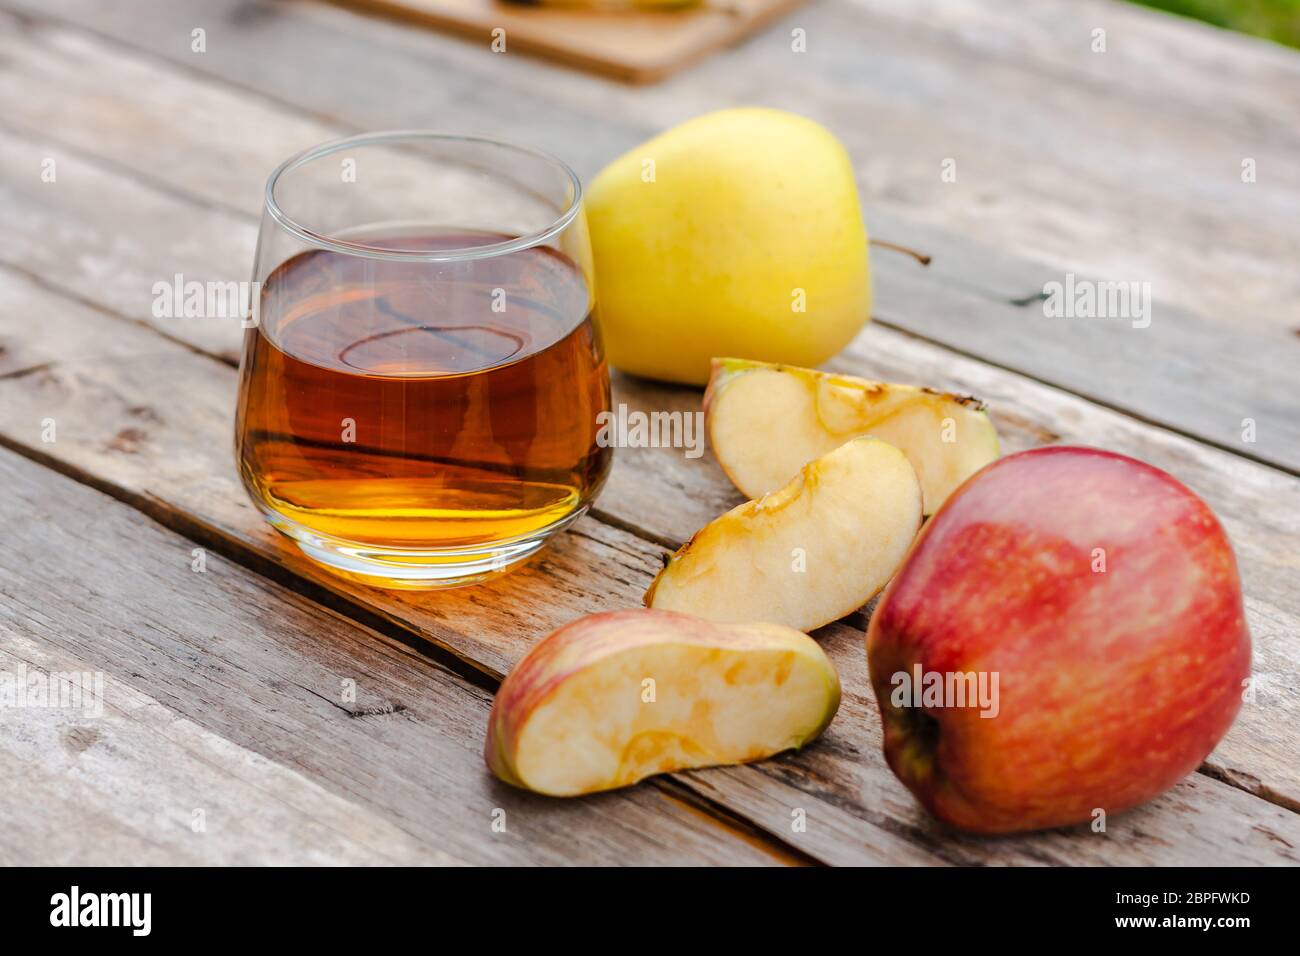 Glass of apple juice with fresh red apple on wooden table. Apple cut into slices. Harvest autumn vitamin concept.  Stock Photo